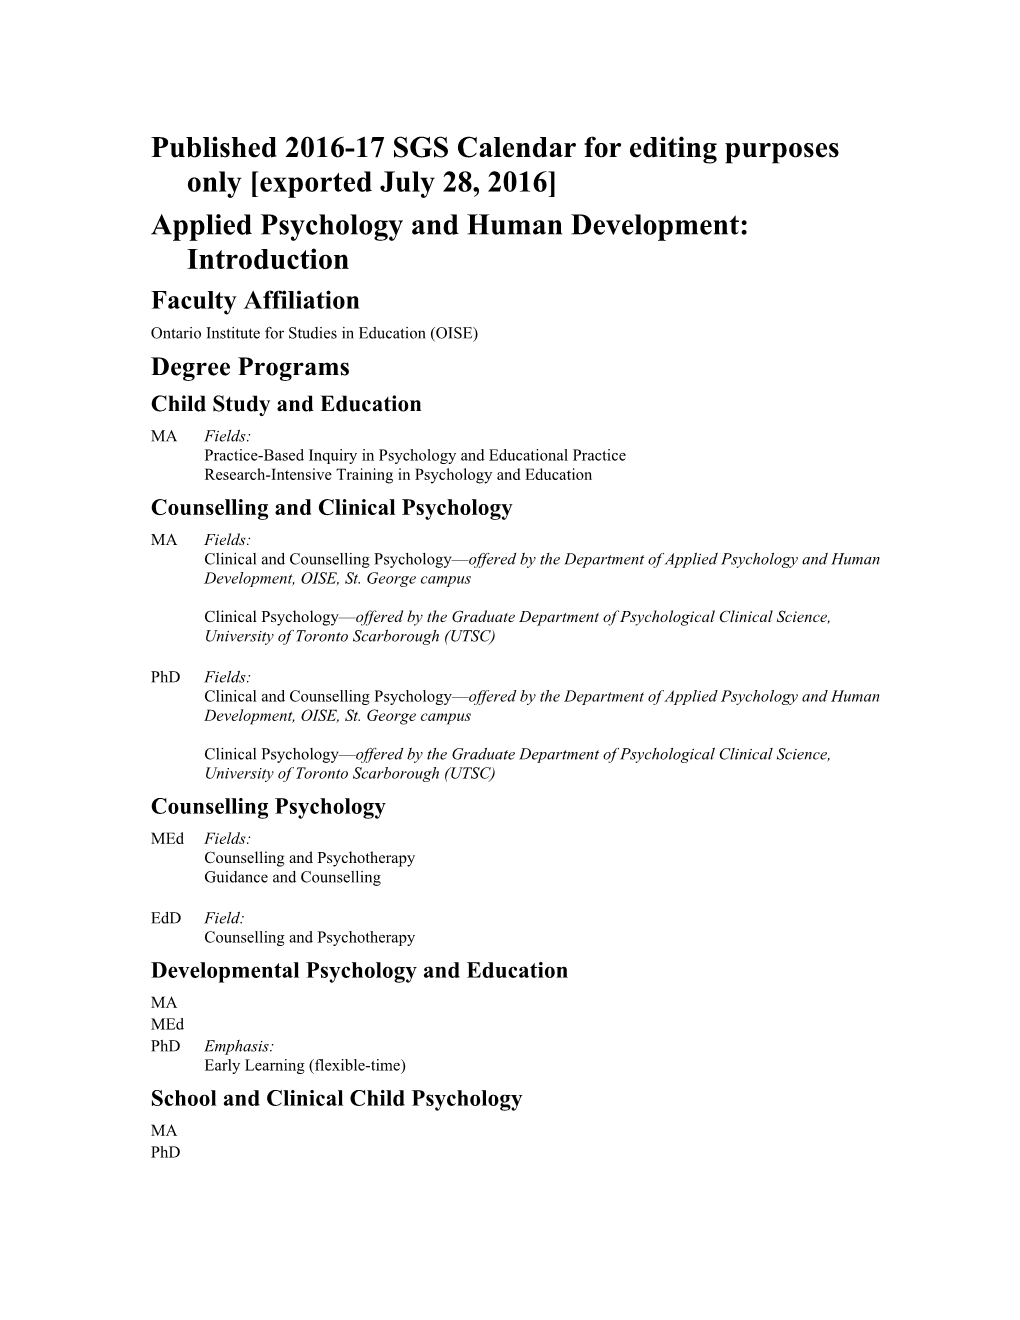 Applied Psychology and Human Development